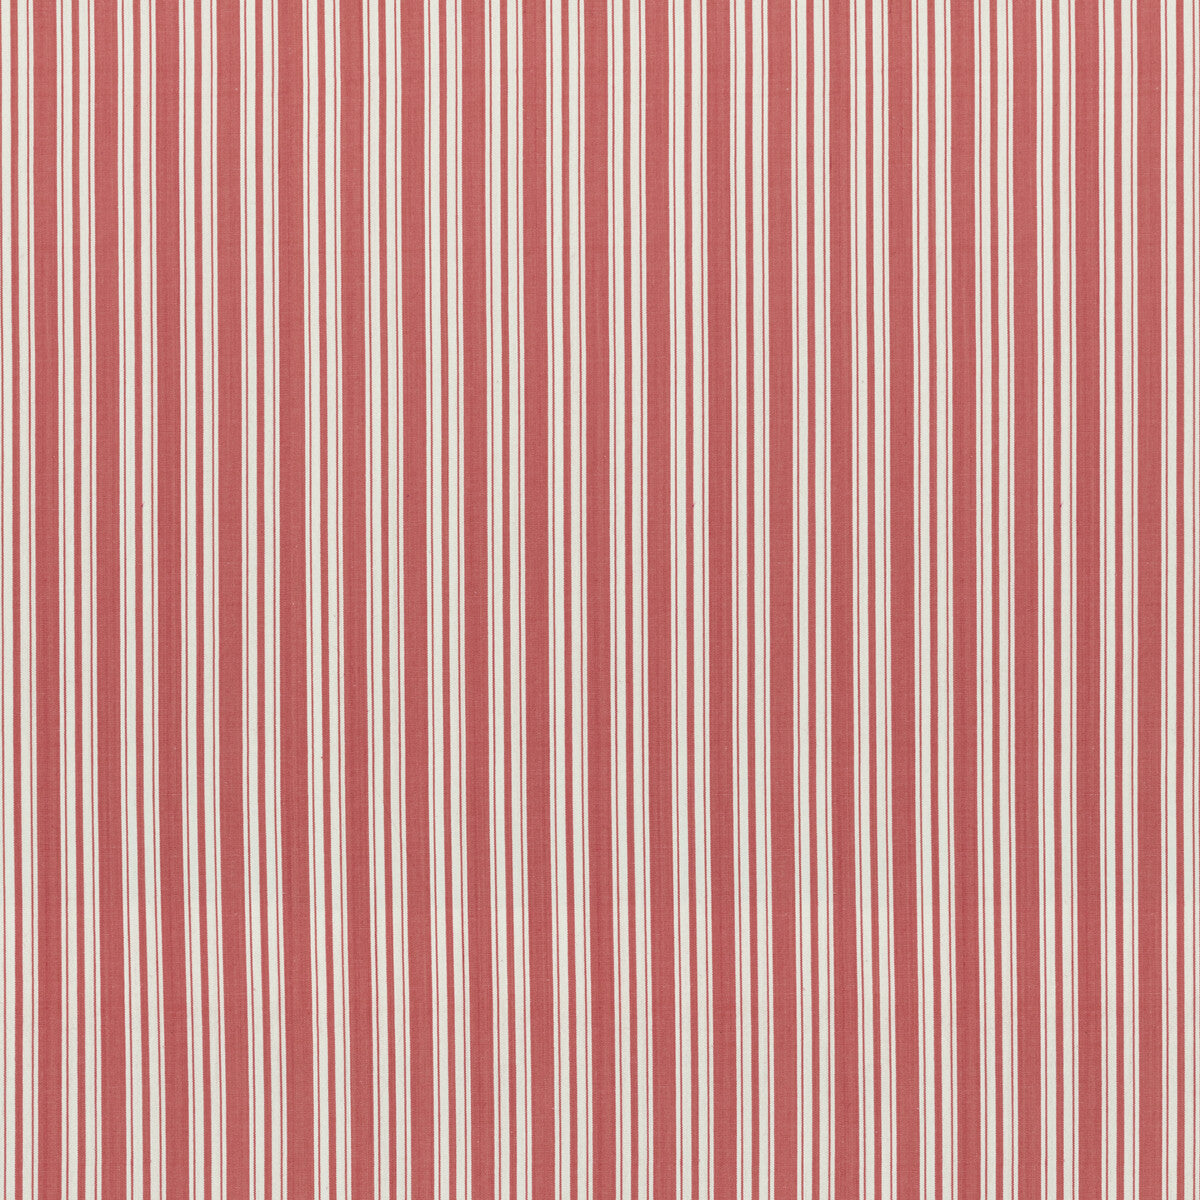 Selune Stripe fabric in red color - pattern 8022118.19.0 - by Brunschwig &amp; Fils in the Normant Checks And Stripes II collection